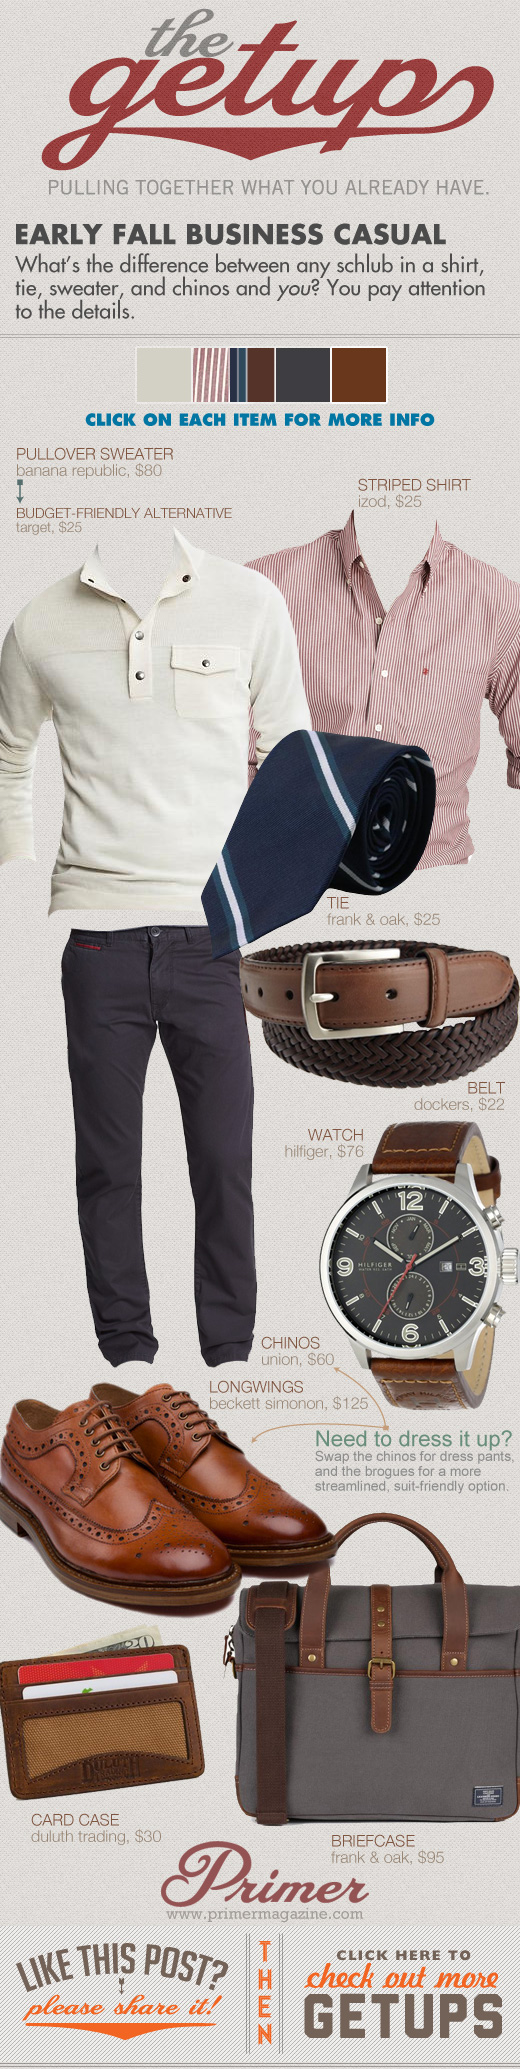 Early Fall Business Casual Getup - white sweater, pink shirt, blue tie, gray pants